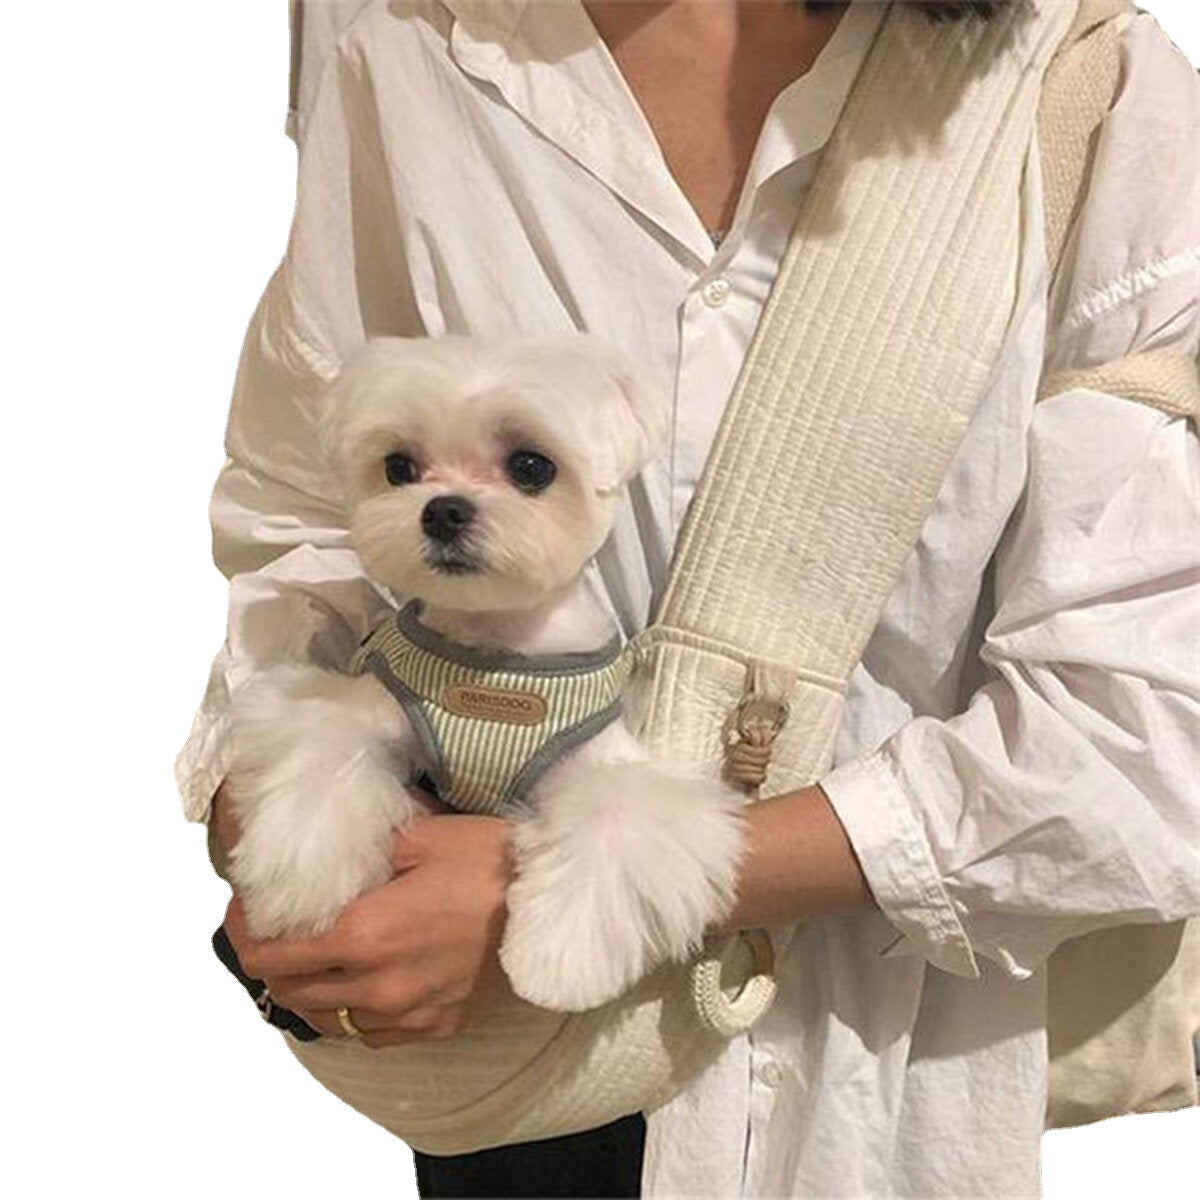 Travel Pet Puppy Dog Carrier Backpack Tote Shoulder Bag Sling Carry Pack Puppy Pets Supplies